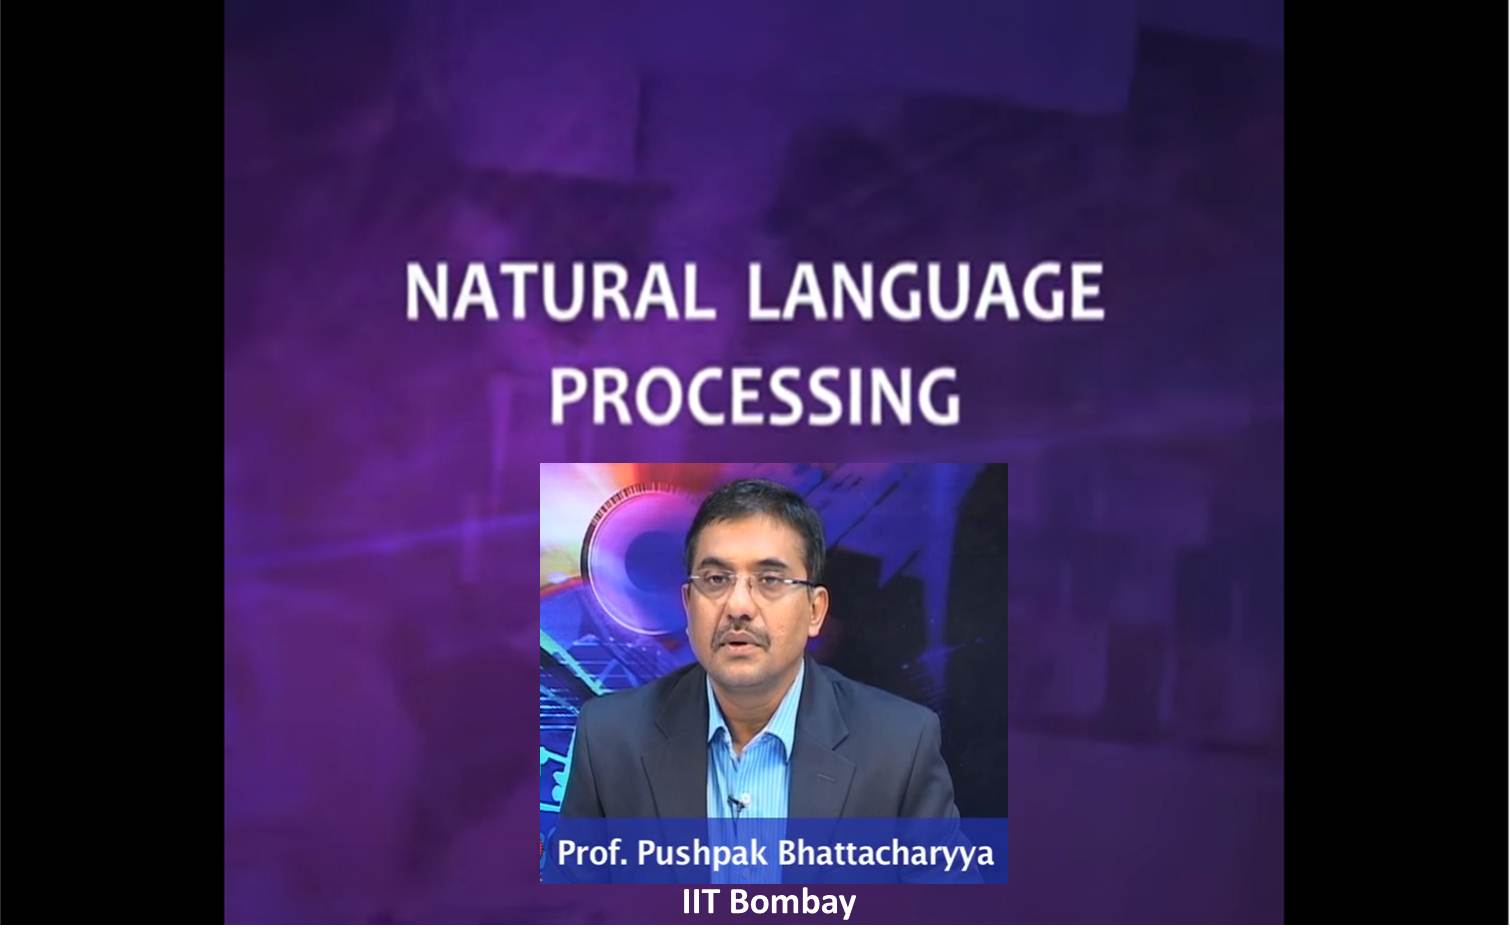 http://study.aisectonline.com/images/SubCategory/Video Lecture series on Natural Language Processing by Prof. Pushpak Bhattacharyya, IIT Bombay..jpg